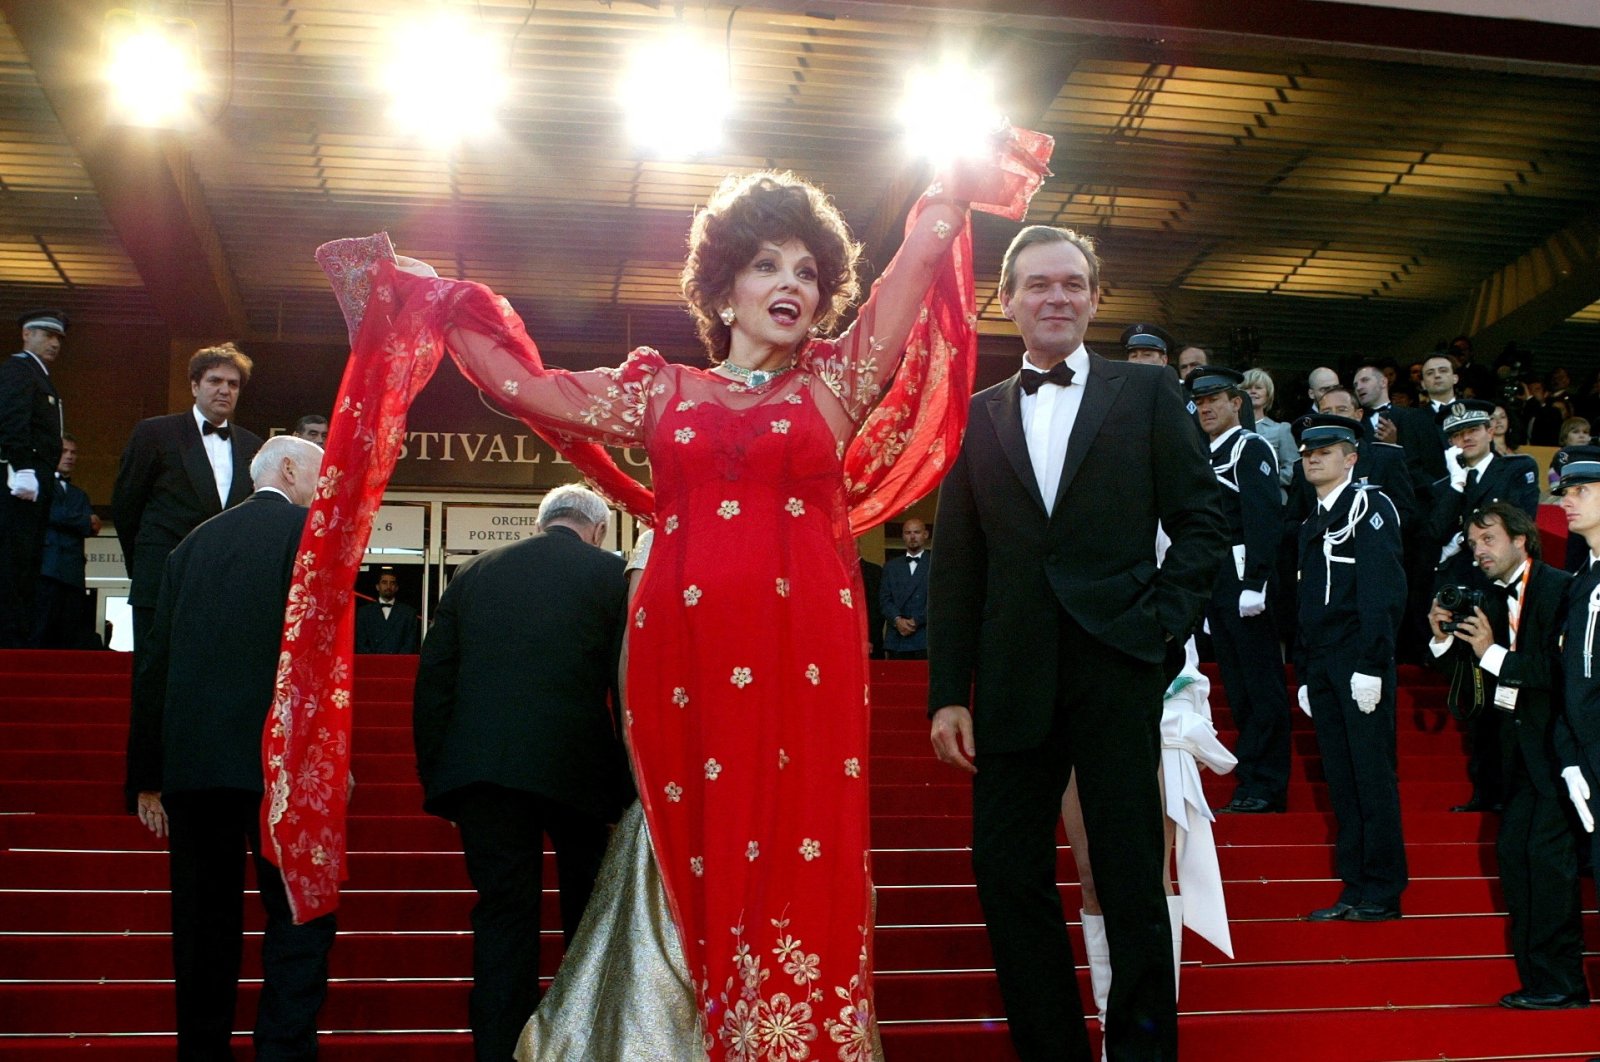 Italian actress Gina Lollobrigida (C) waves to the crowd during red-carpet arrivals with French Culture Minister Jean-Jacques Aillagon (C Rear) for the screening of the remake of &quot;Fanfan la Tulipe&quot; by [French director Gerard Krawczyk] on the opening night of the 56th International Film Festival in Cannes, France, May 14, 2003. (Reuters Photo)